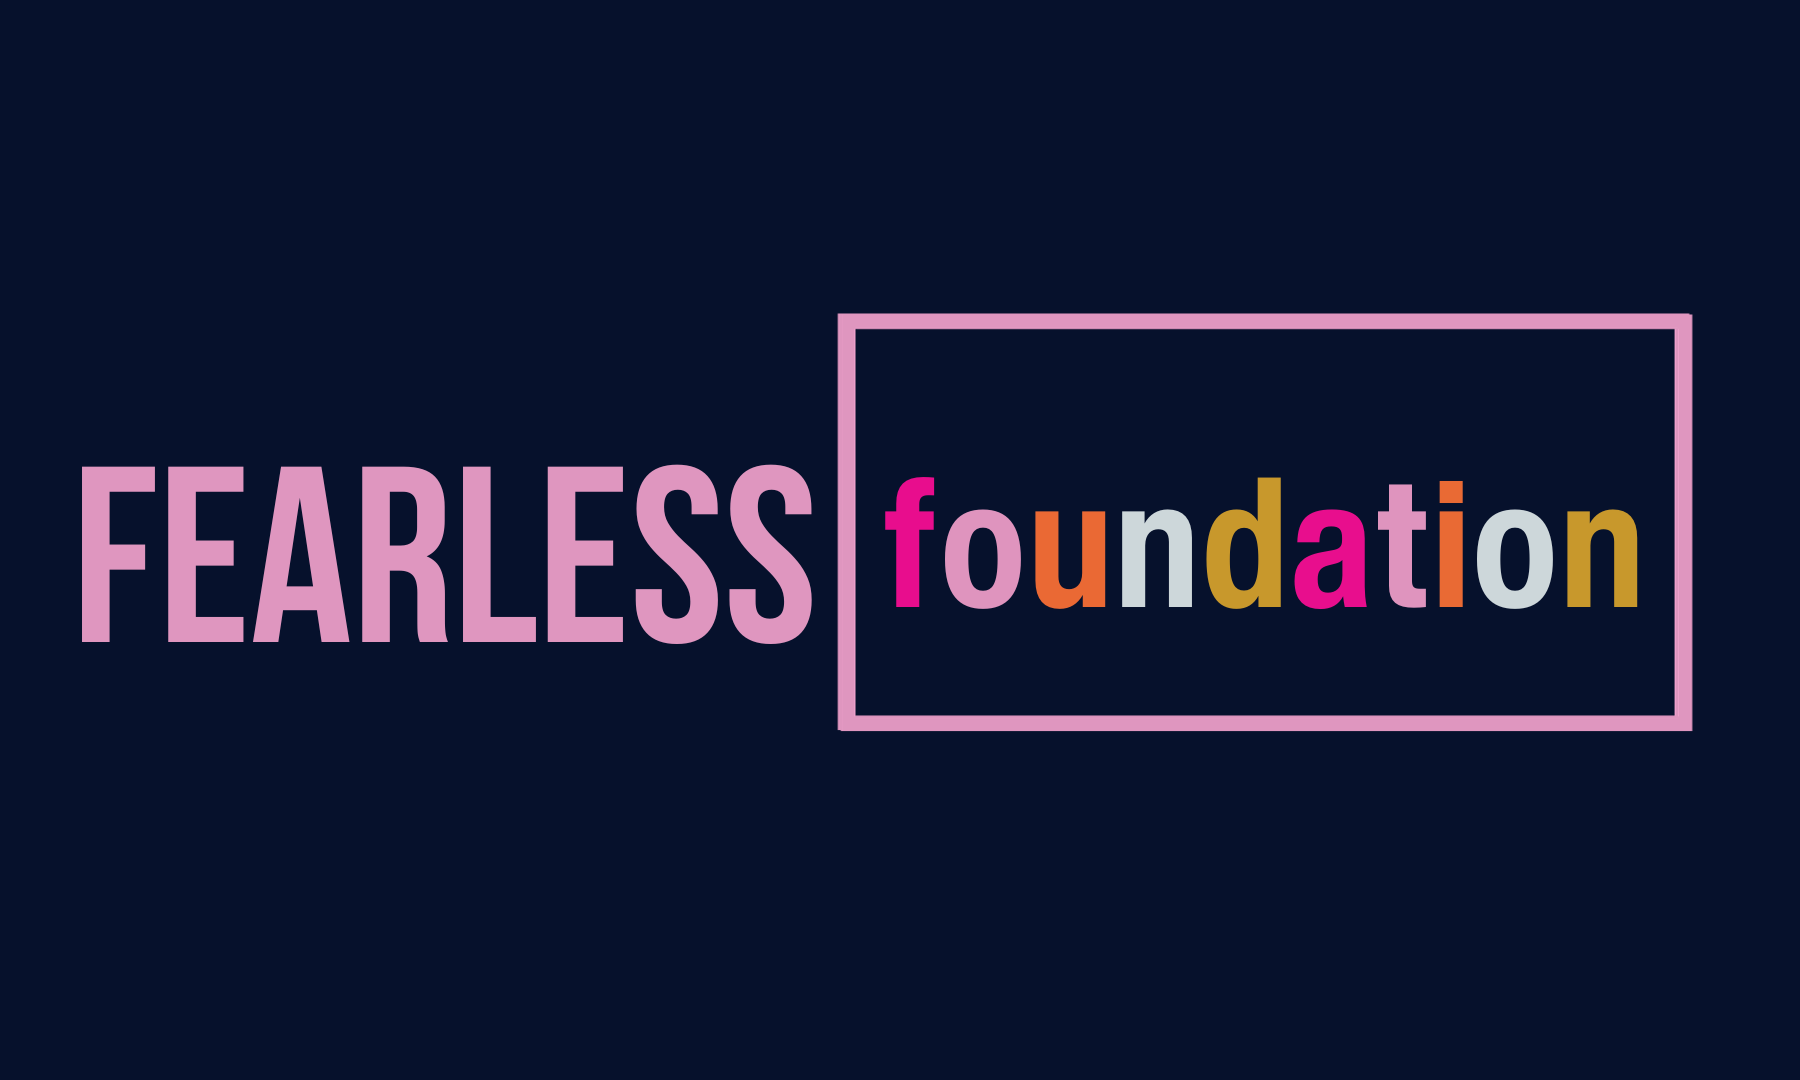 FEARLESS FOUNDATION